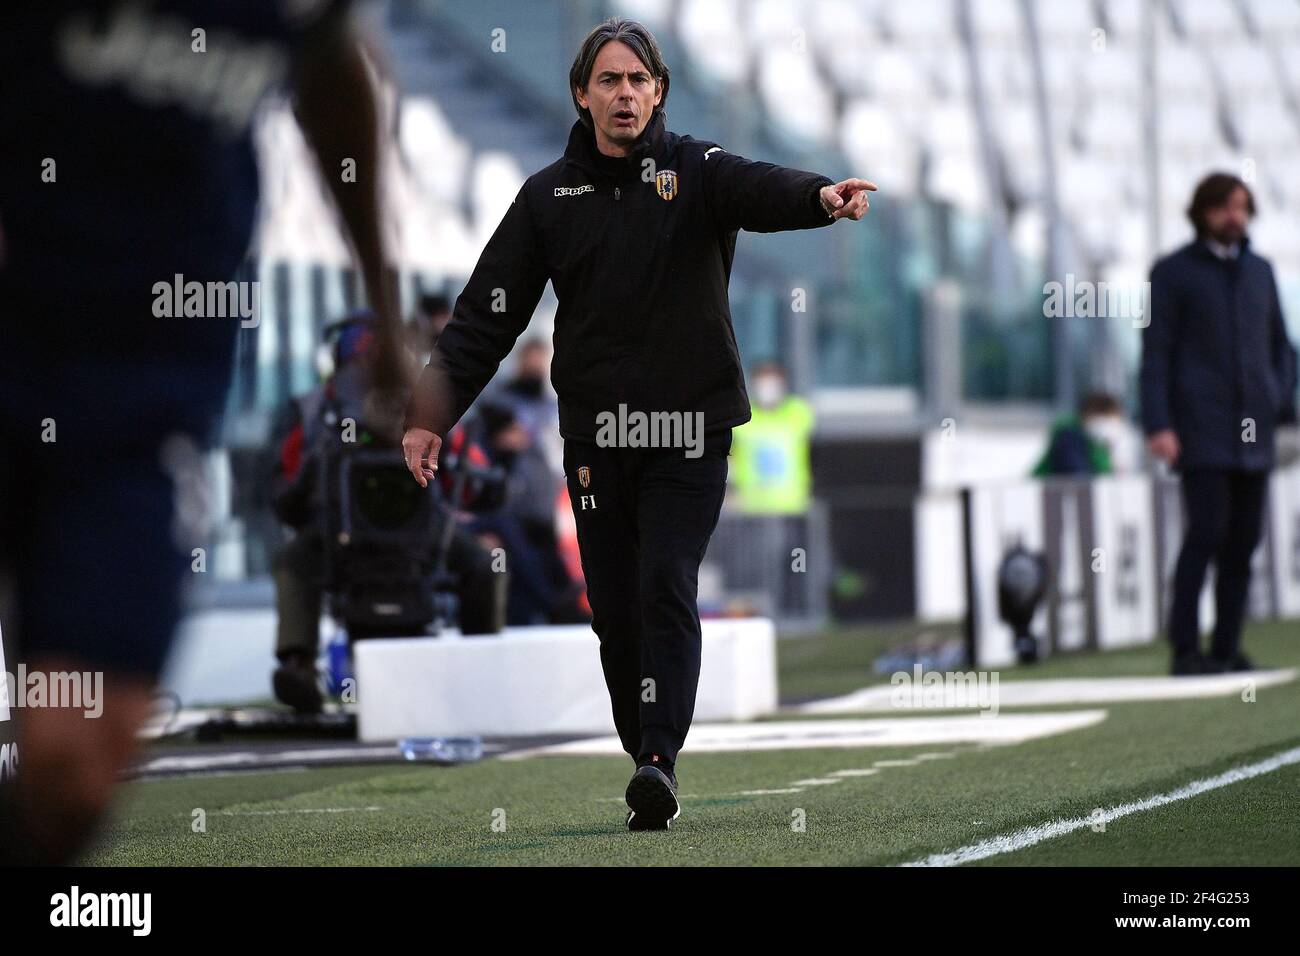 Turin, Italy. 21st Mar, 2021. Filippo Inzaghi coach of Benevento Calcio reacts during the Serie A football match between Juventus FC and Benevento Calcio at Allianz stadium in Torino (Italy), March 21th, 2021. Photo Federico Tardito/Insidefoto Credit: insidefoto srl/Alamy Live News Stock Photo